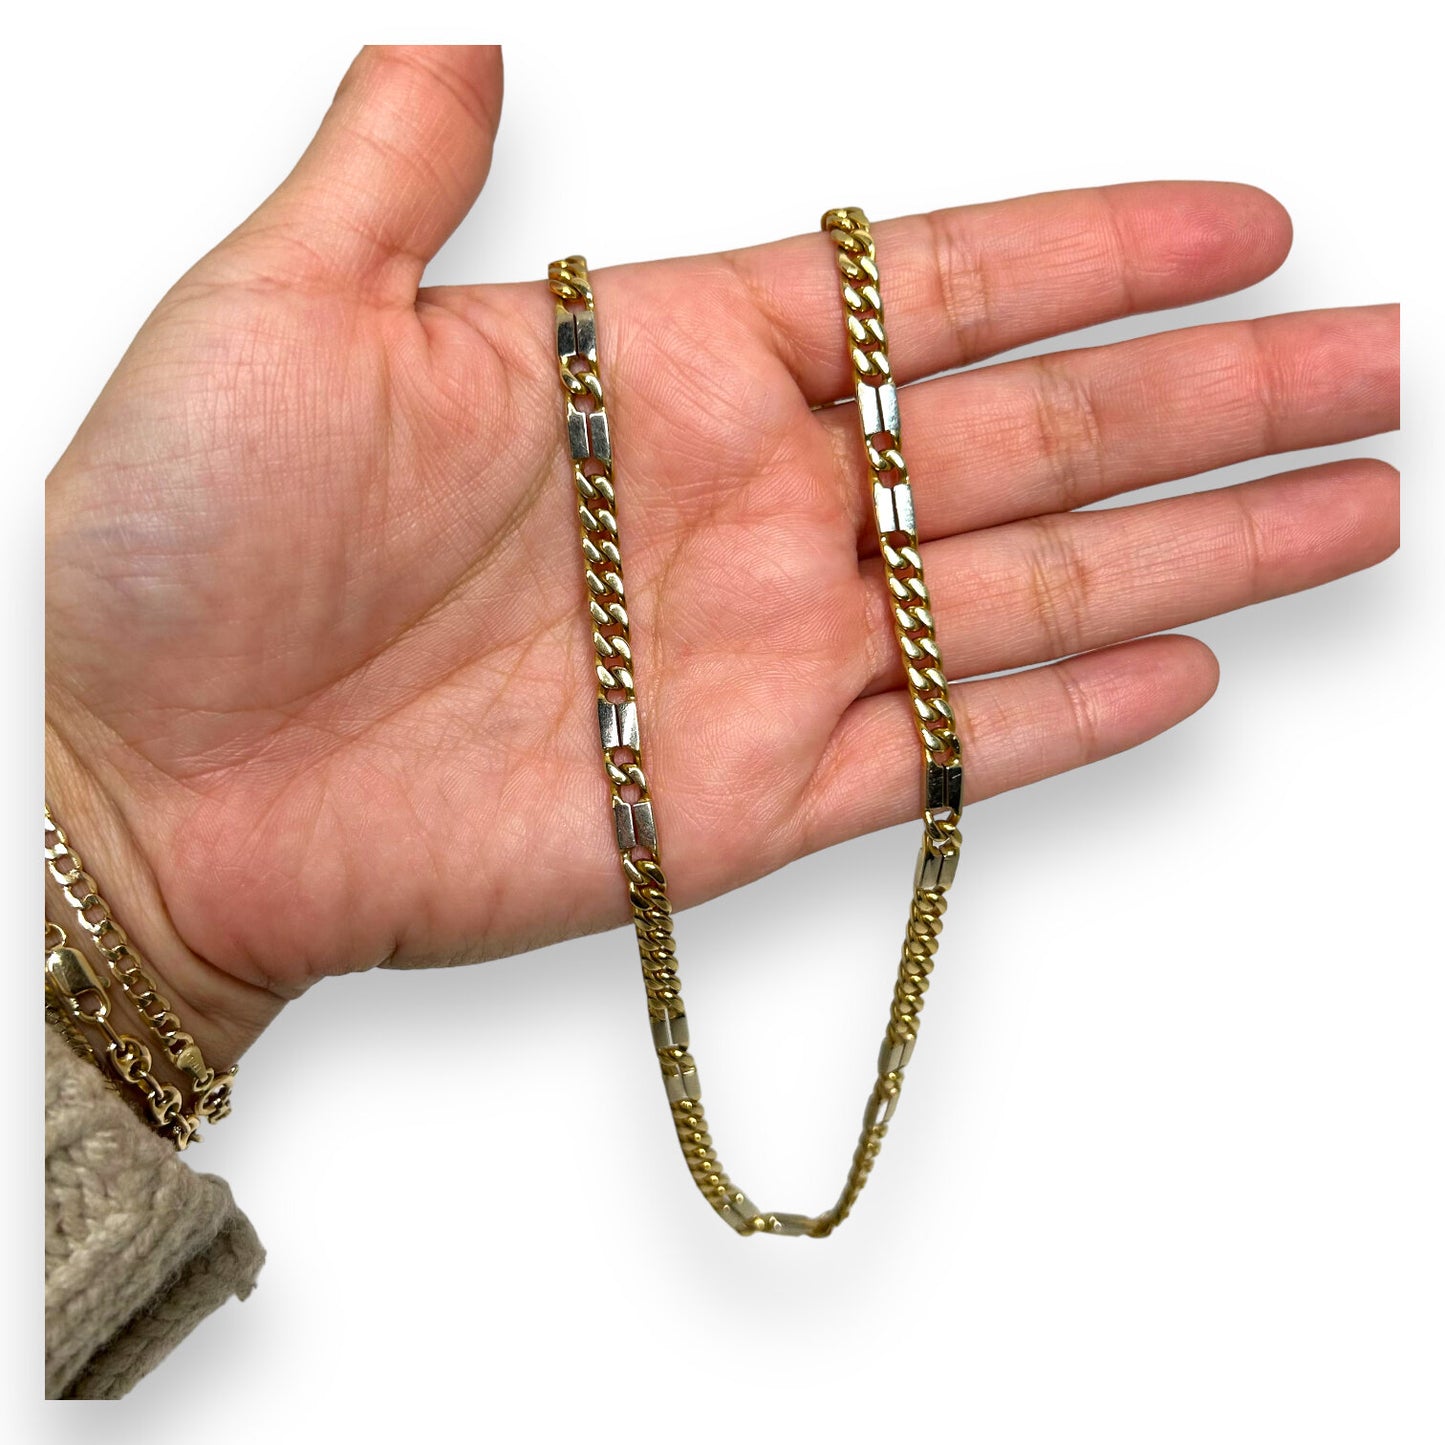 VINTAGE 14K TWO-TONED CURB LINK CHAIN w/ DOUBLE BAR LINKS